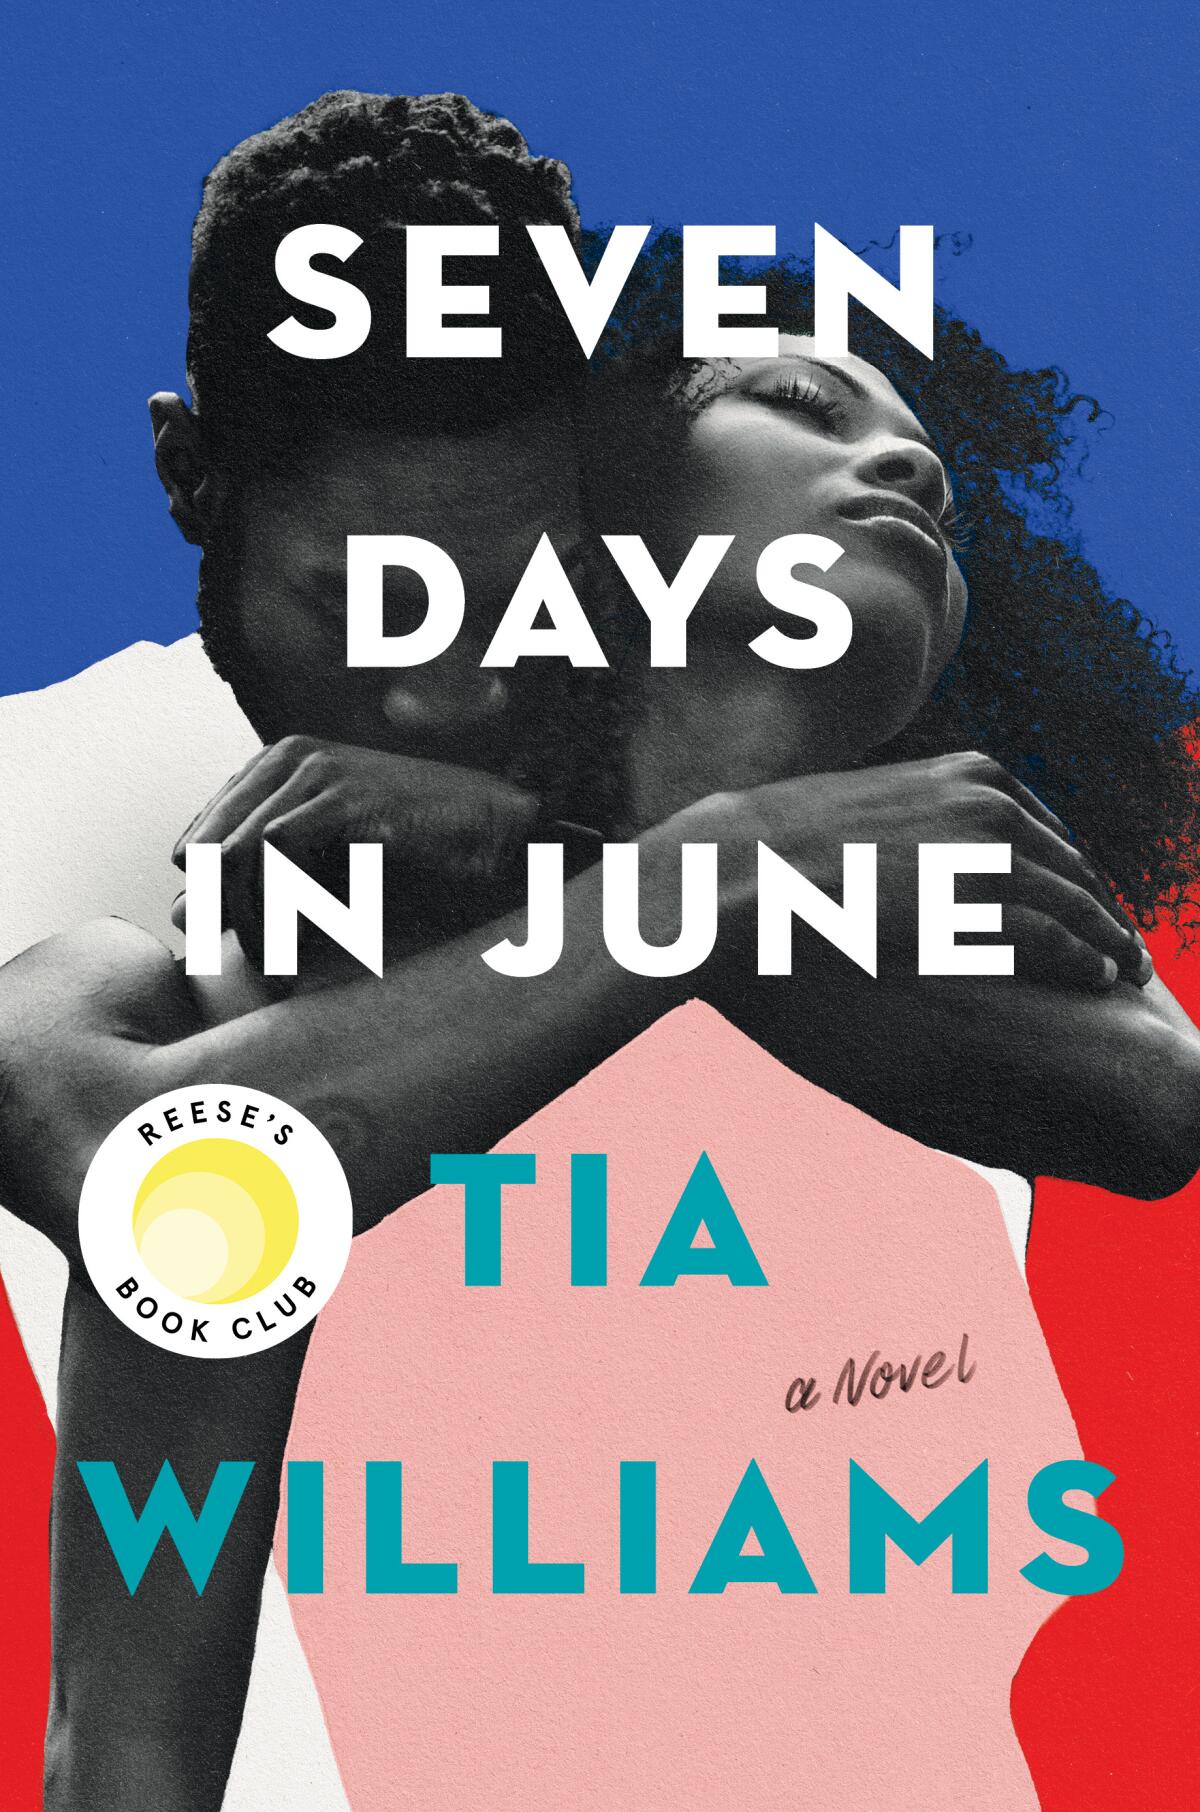 The cover of the book "Seven Days in June," by Tia Williams